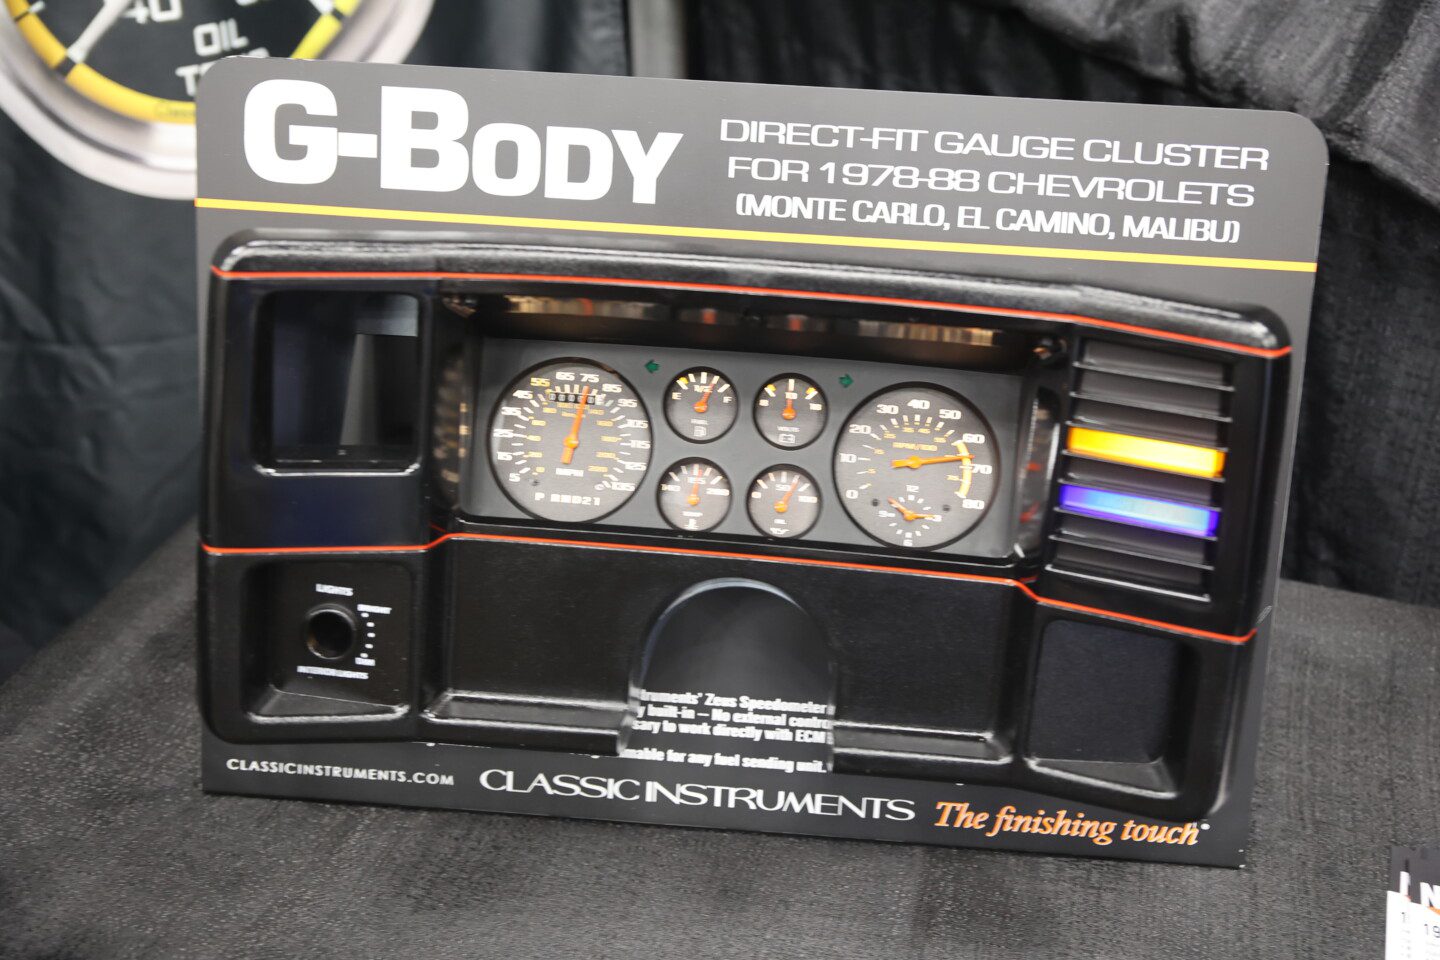 Classic Instruments' Gauge For G-Body Chevy